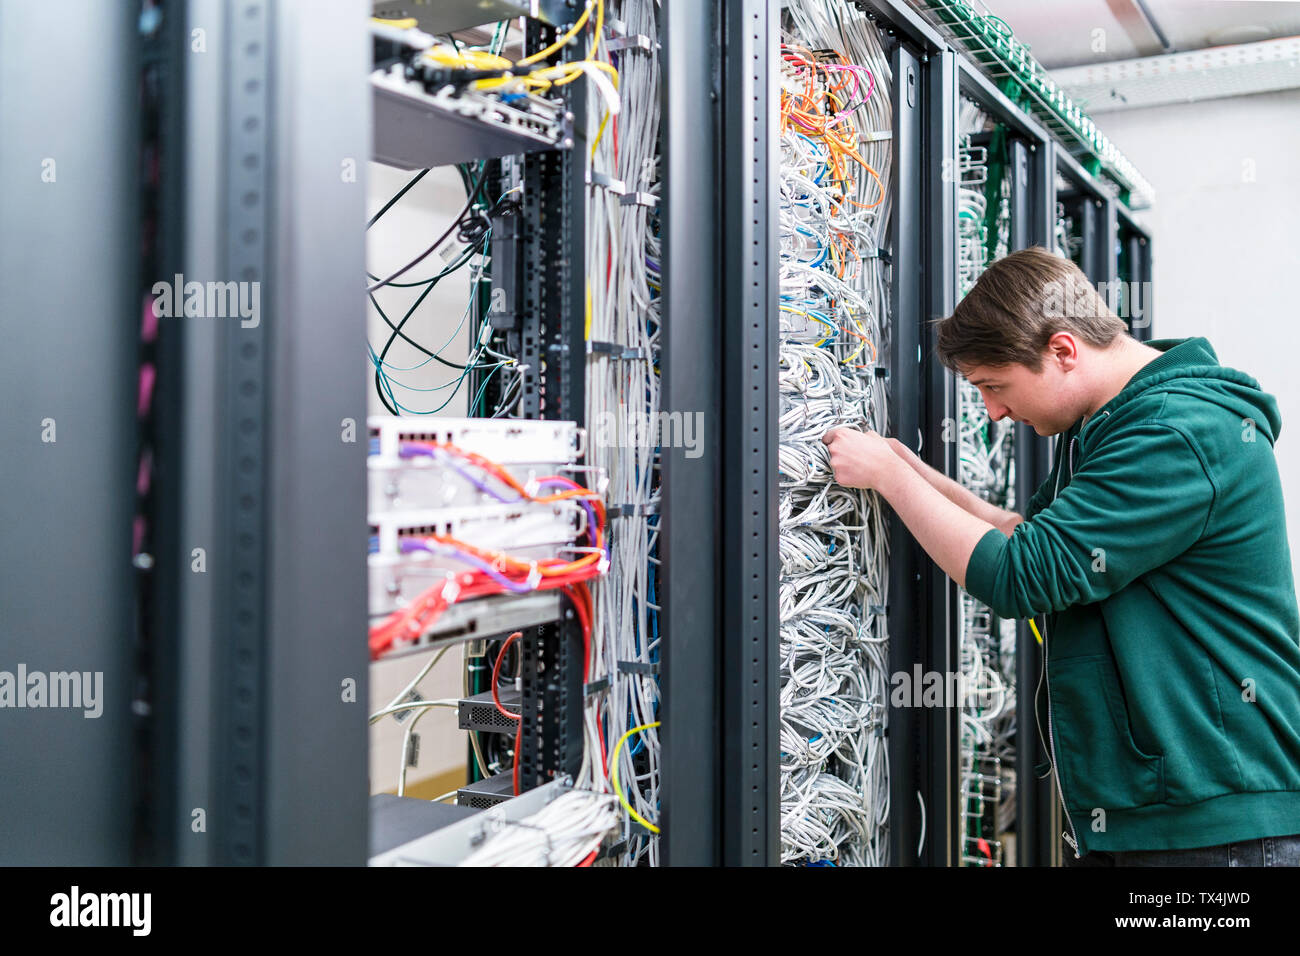 Teenager working with cables in server room Stock Photo